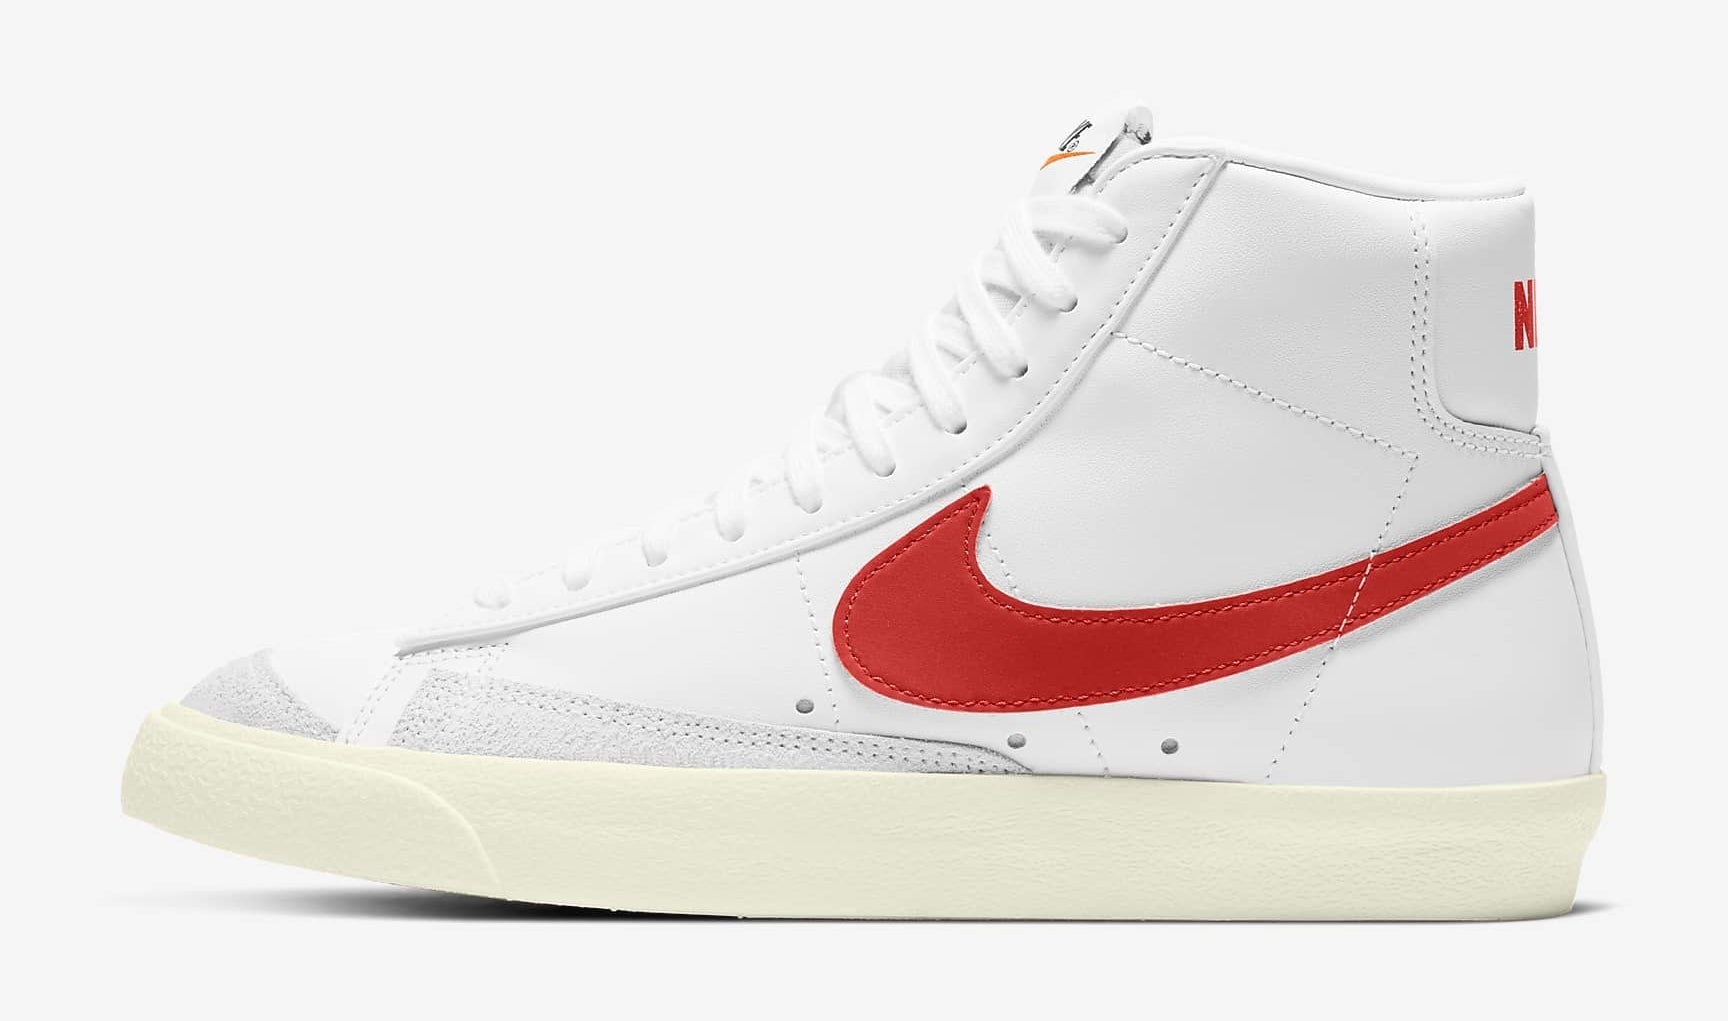 the white sneakers with a red check